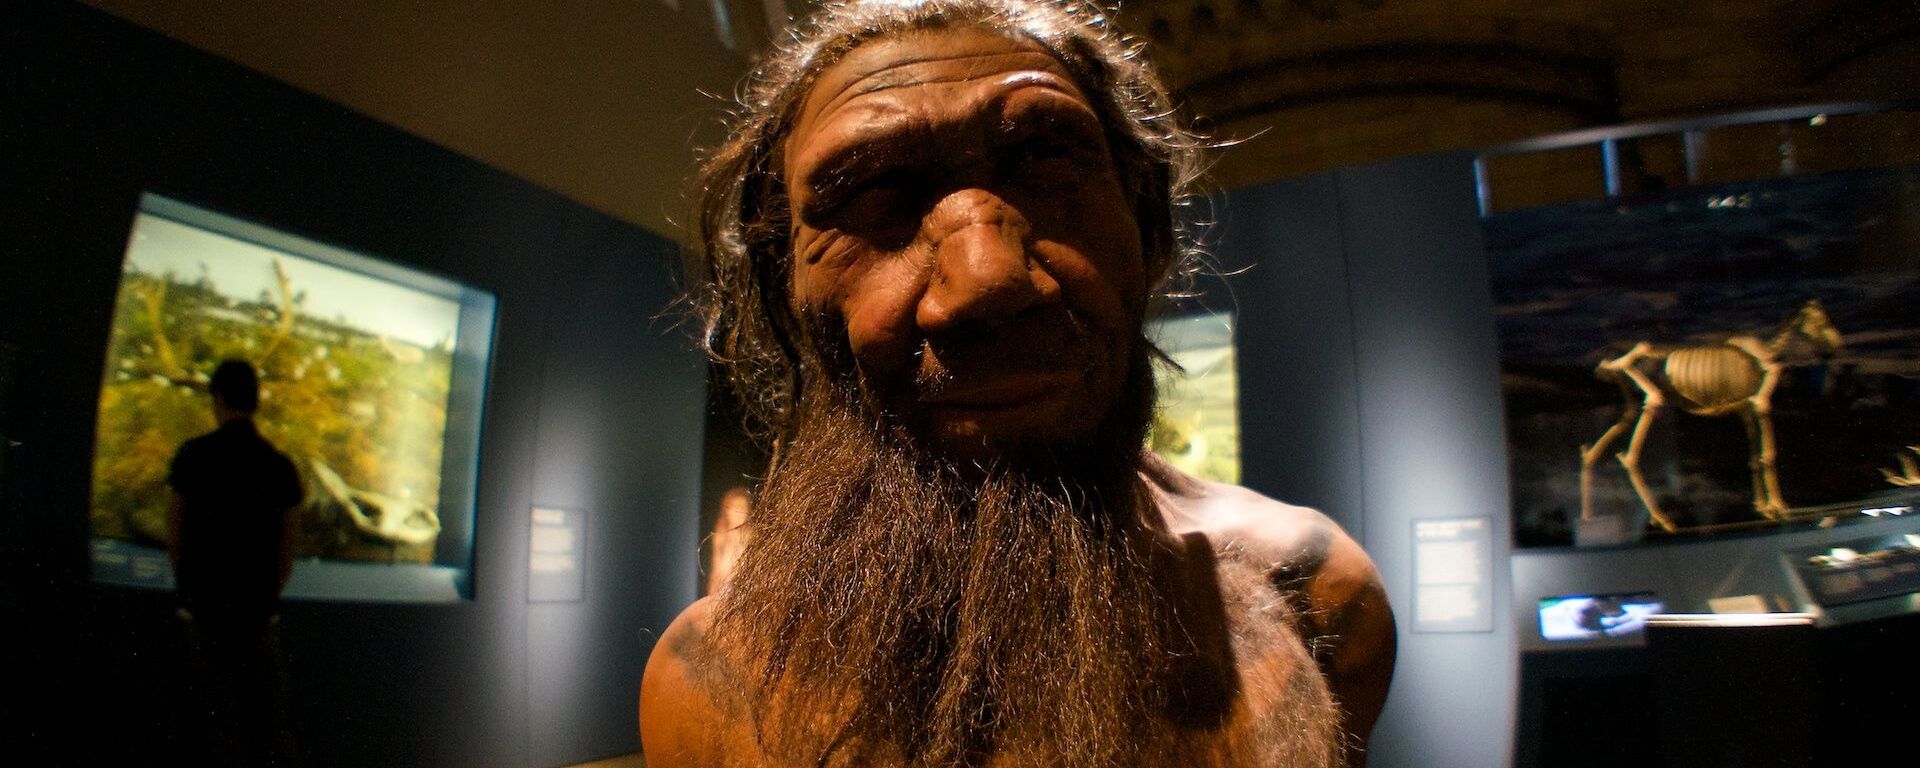 Neanderthal. Britain: One Million Years of the Human Story at the Natural History Museum - Sputnik International, 1920, 30.07.2021